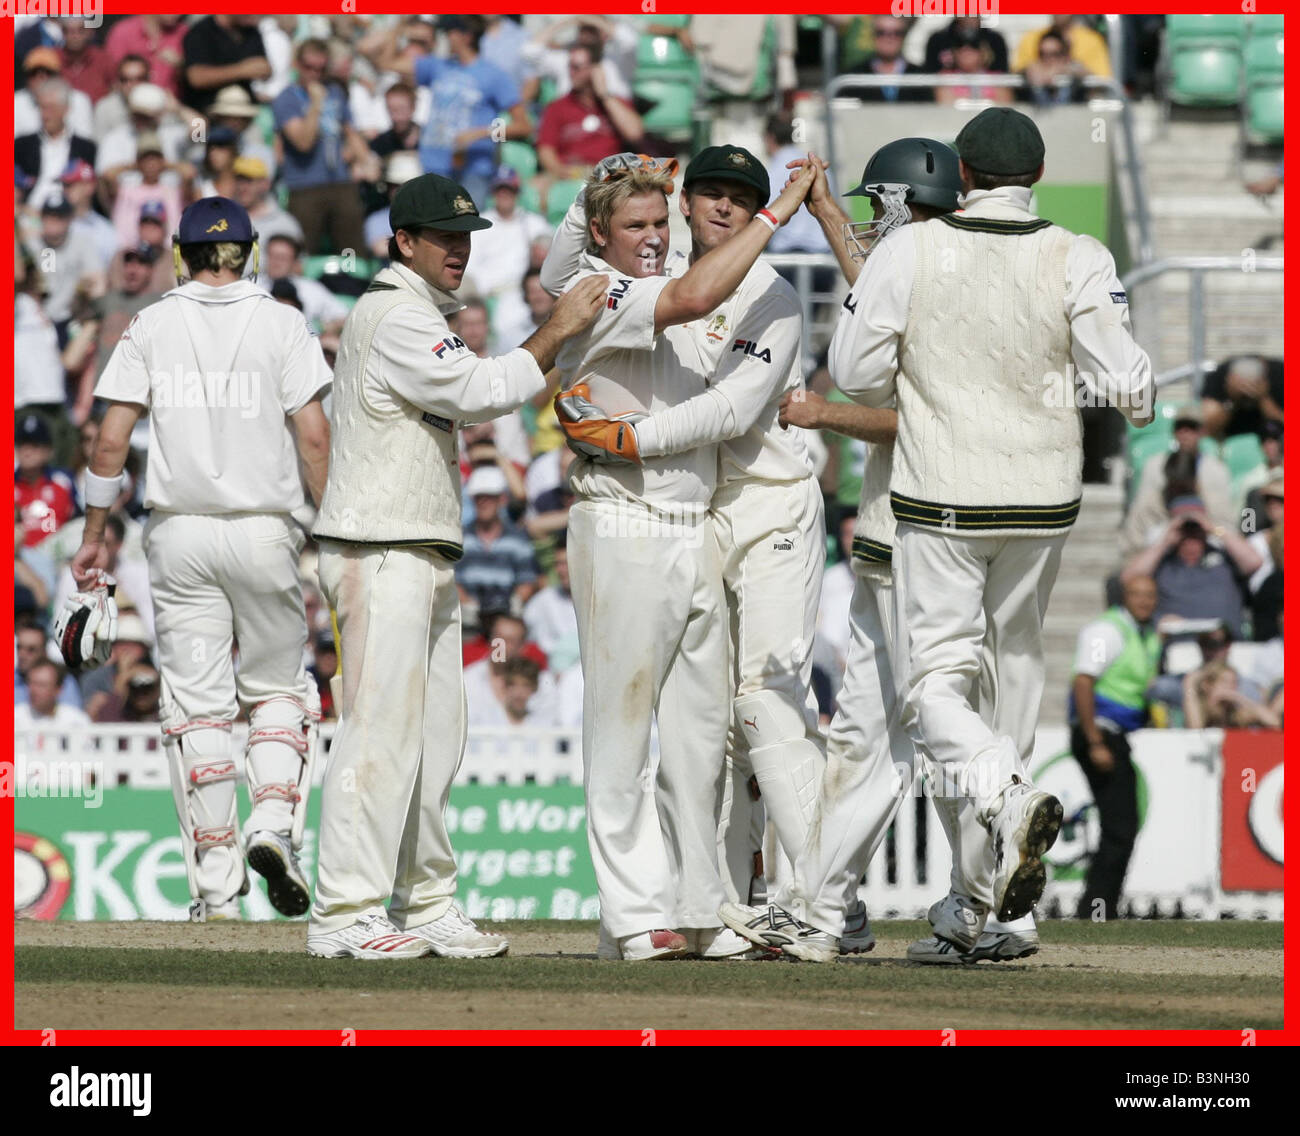 Shane Warne celebrates the wicket of Marcus Trescothick September 2005 England V Australia 5th Ashes Test The Oval England won the Ashes for the first time in 18 years making cricket history after securing a draw in the fifth test to win at the Oval Stock Photo